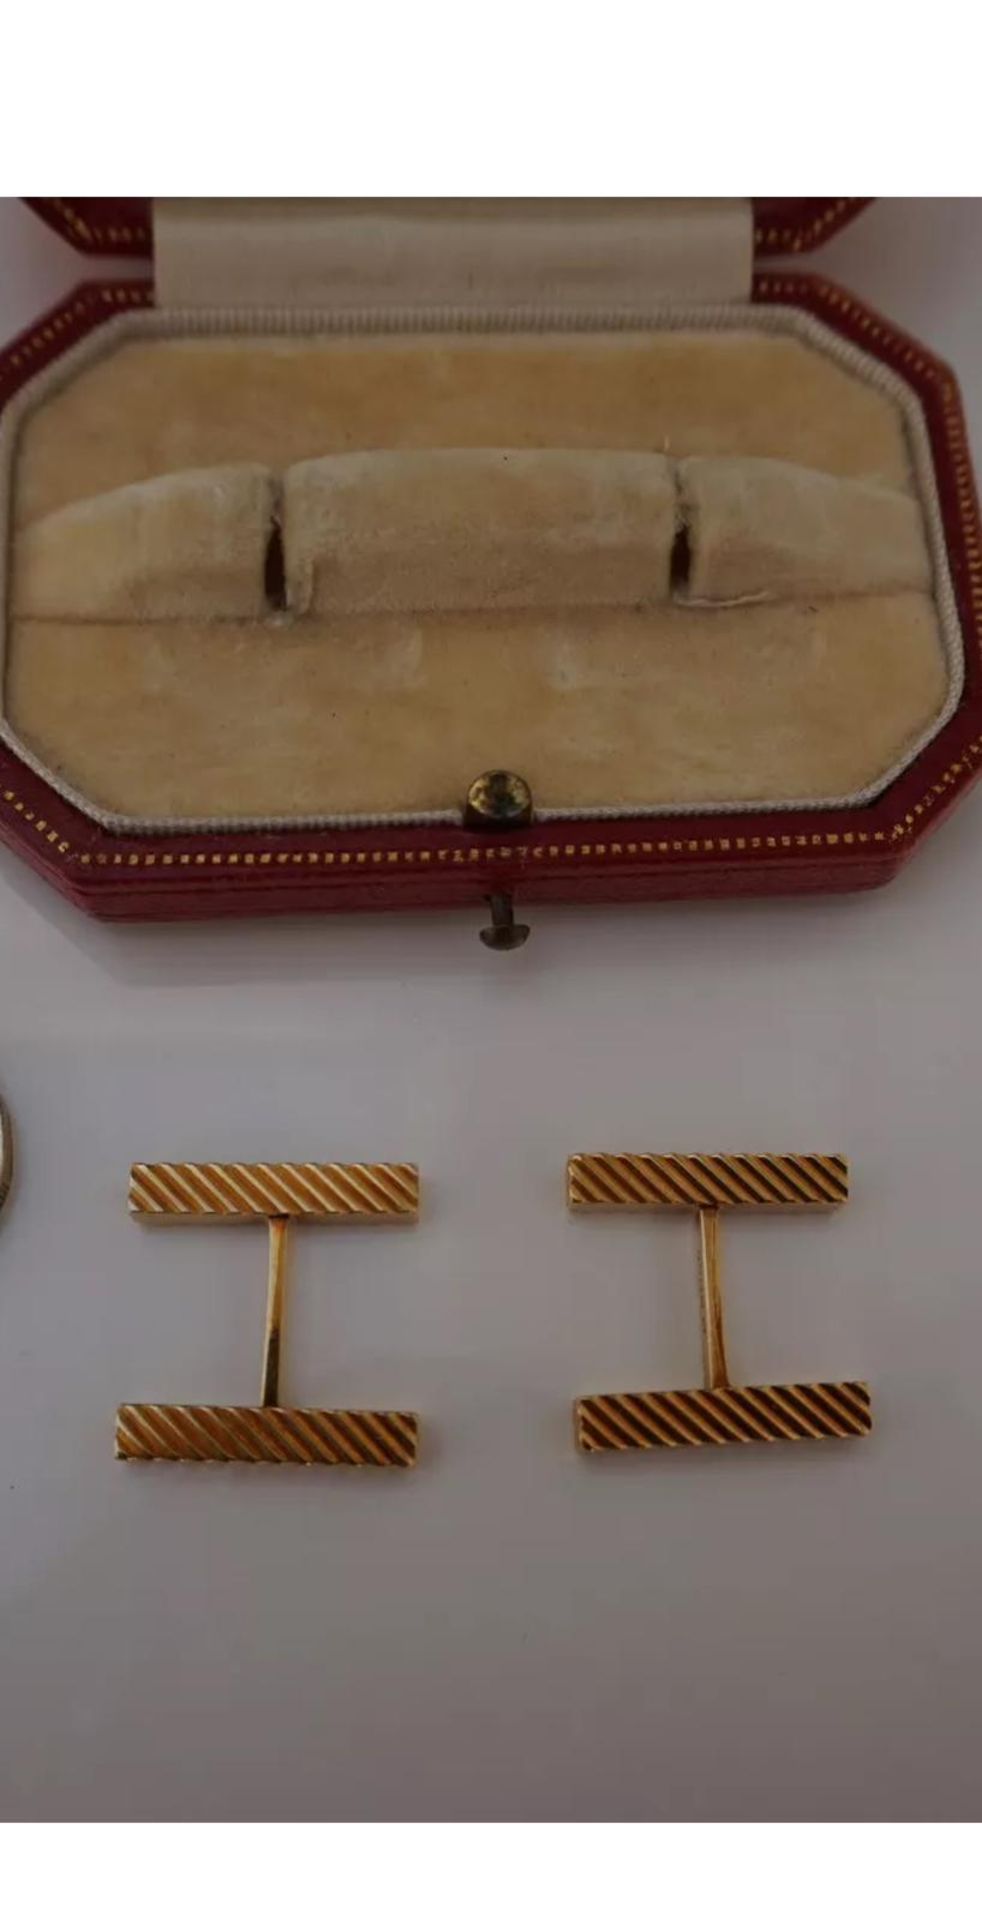 Stunning & Fine Vintage Cartier 18ct Yellow Gold Cuff Links in their Original Cartier Box - Image 2 of 7